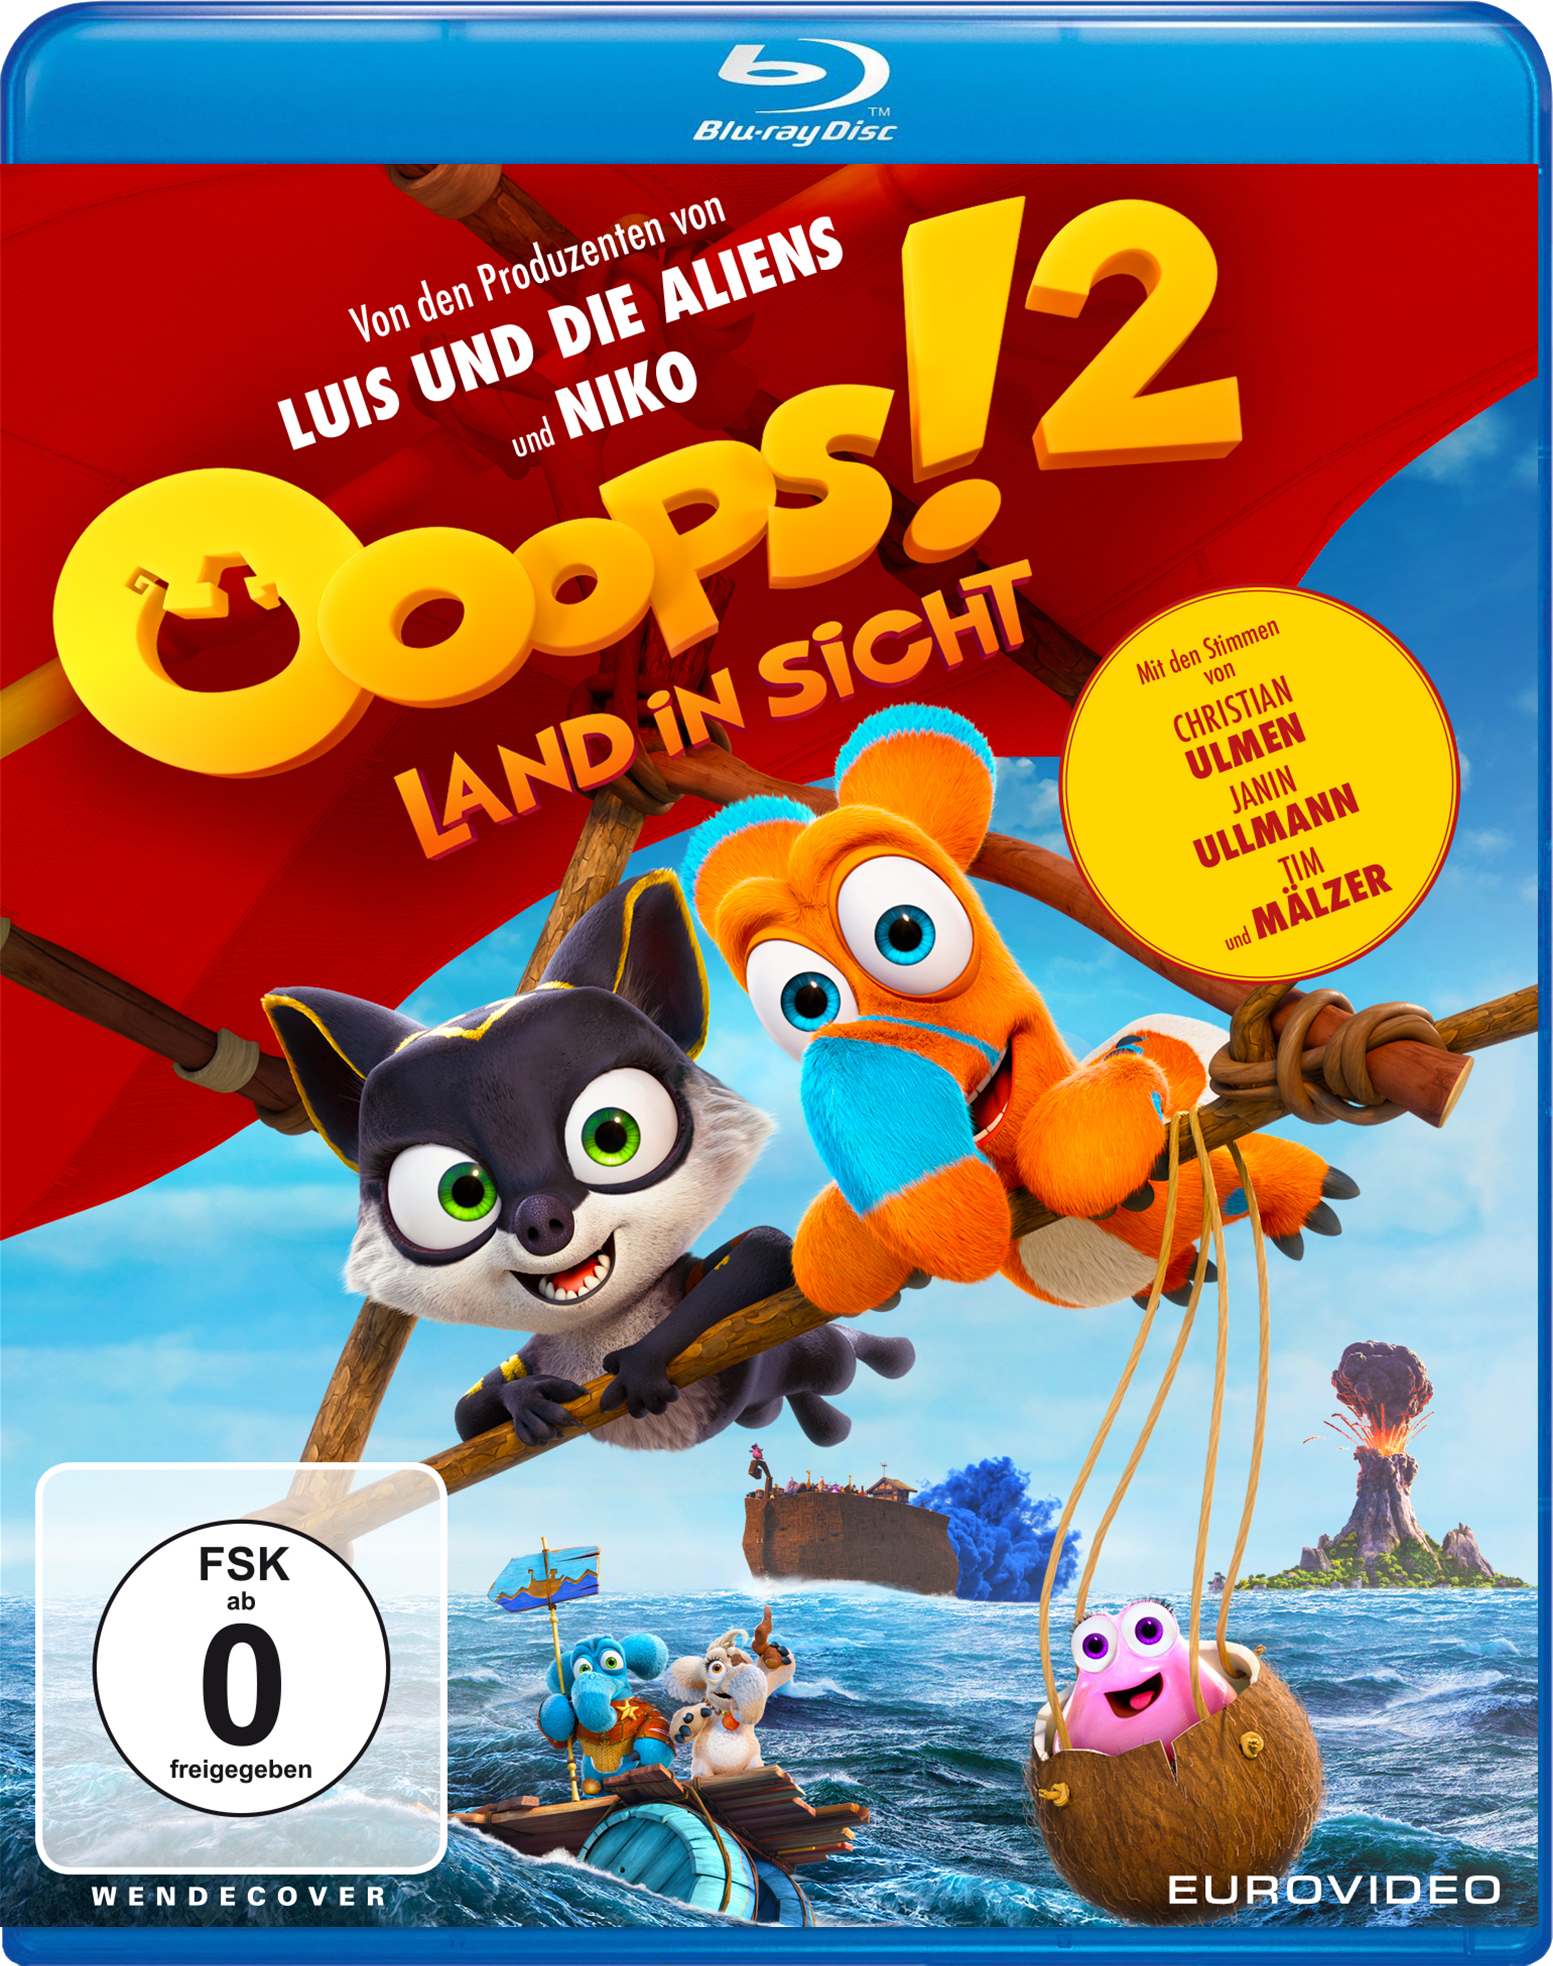 - in Ooops! Blu-ray Sicht 2 Land